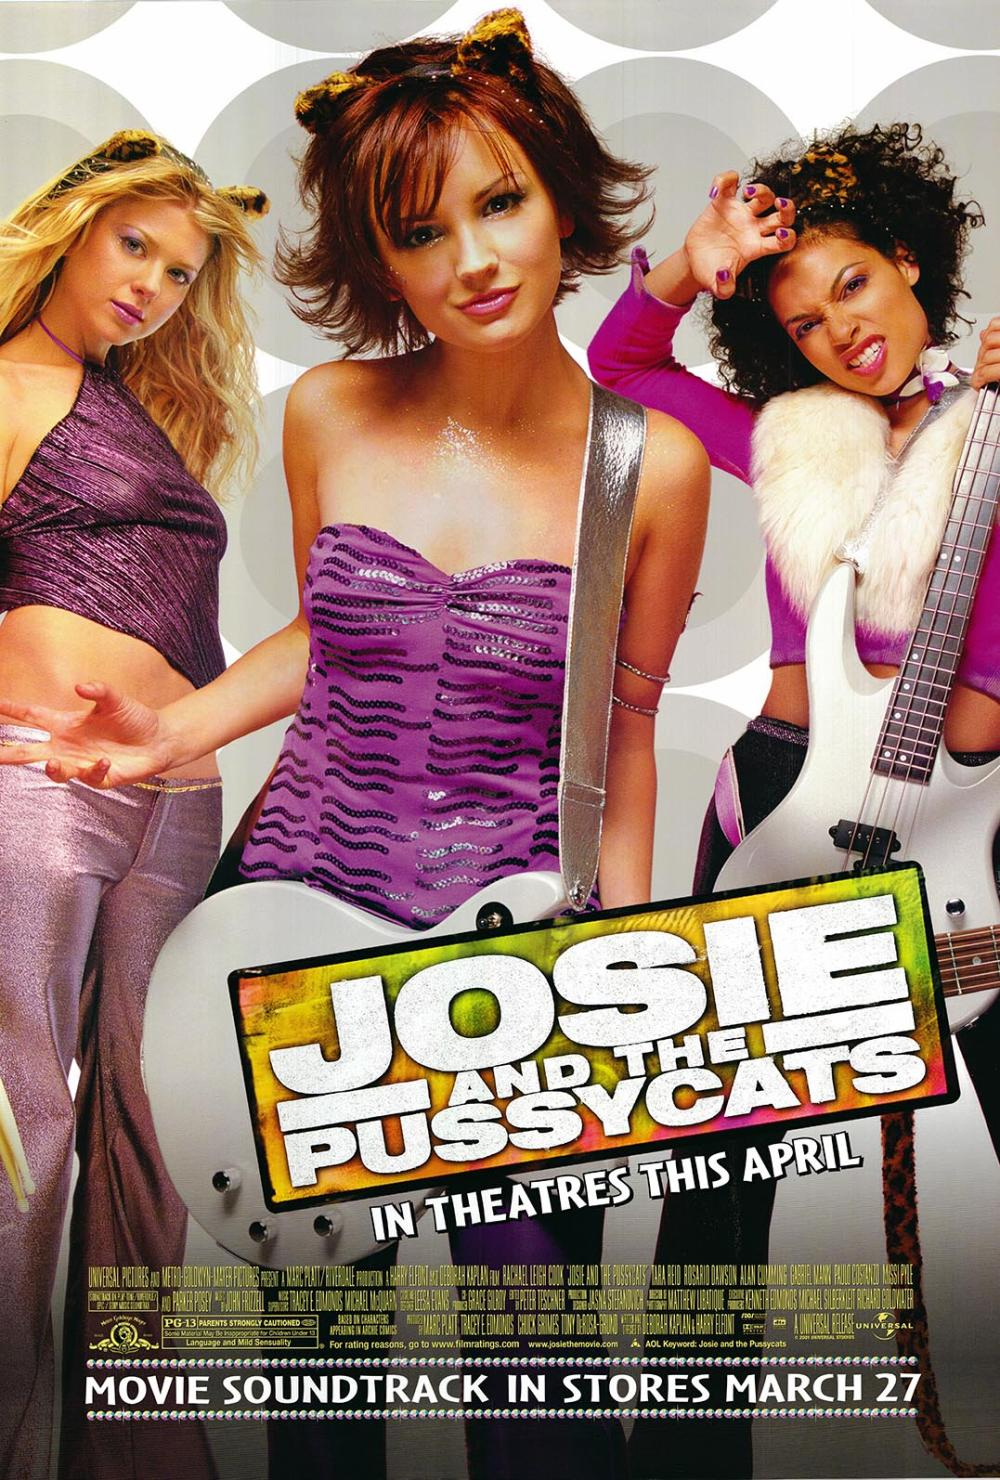 Josie and the Pussycats (2001) Poster